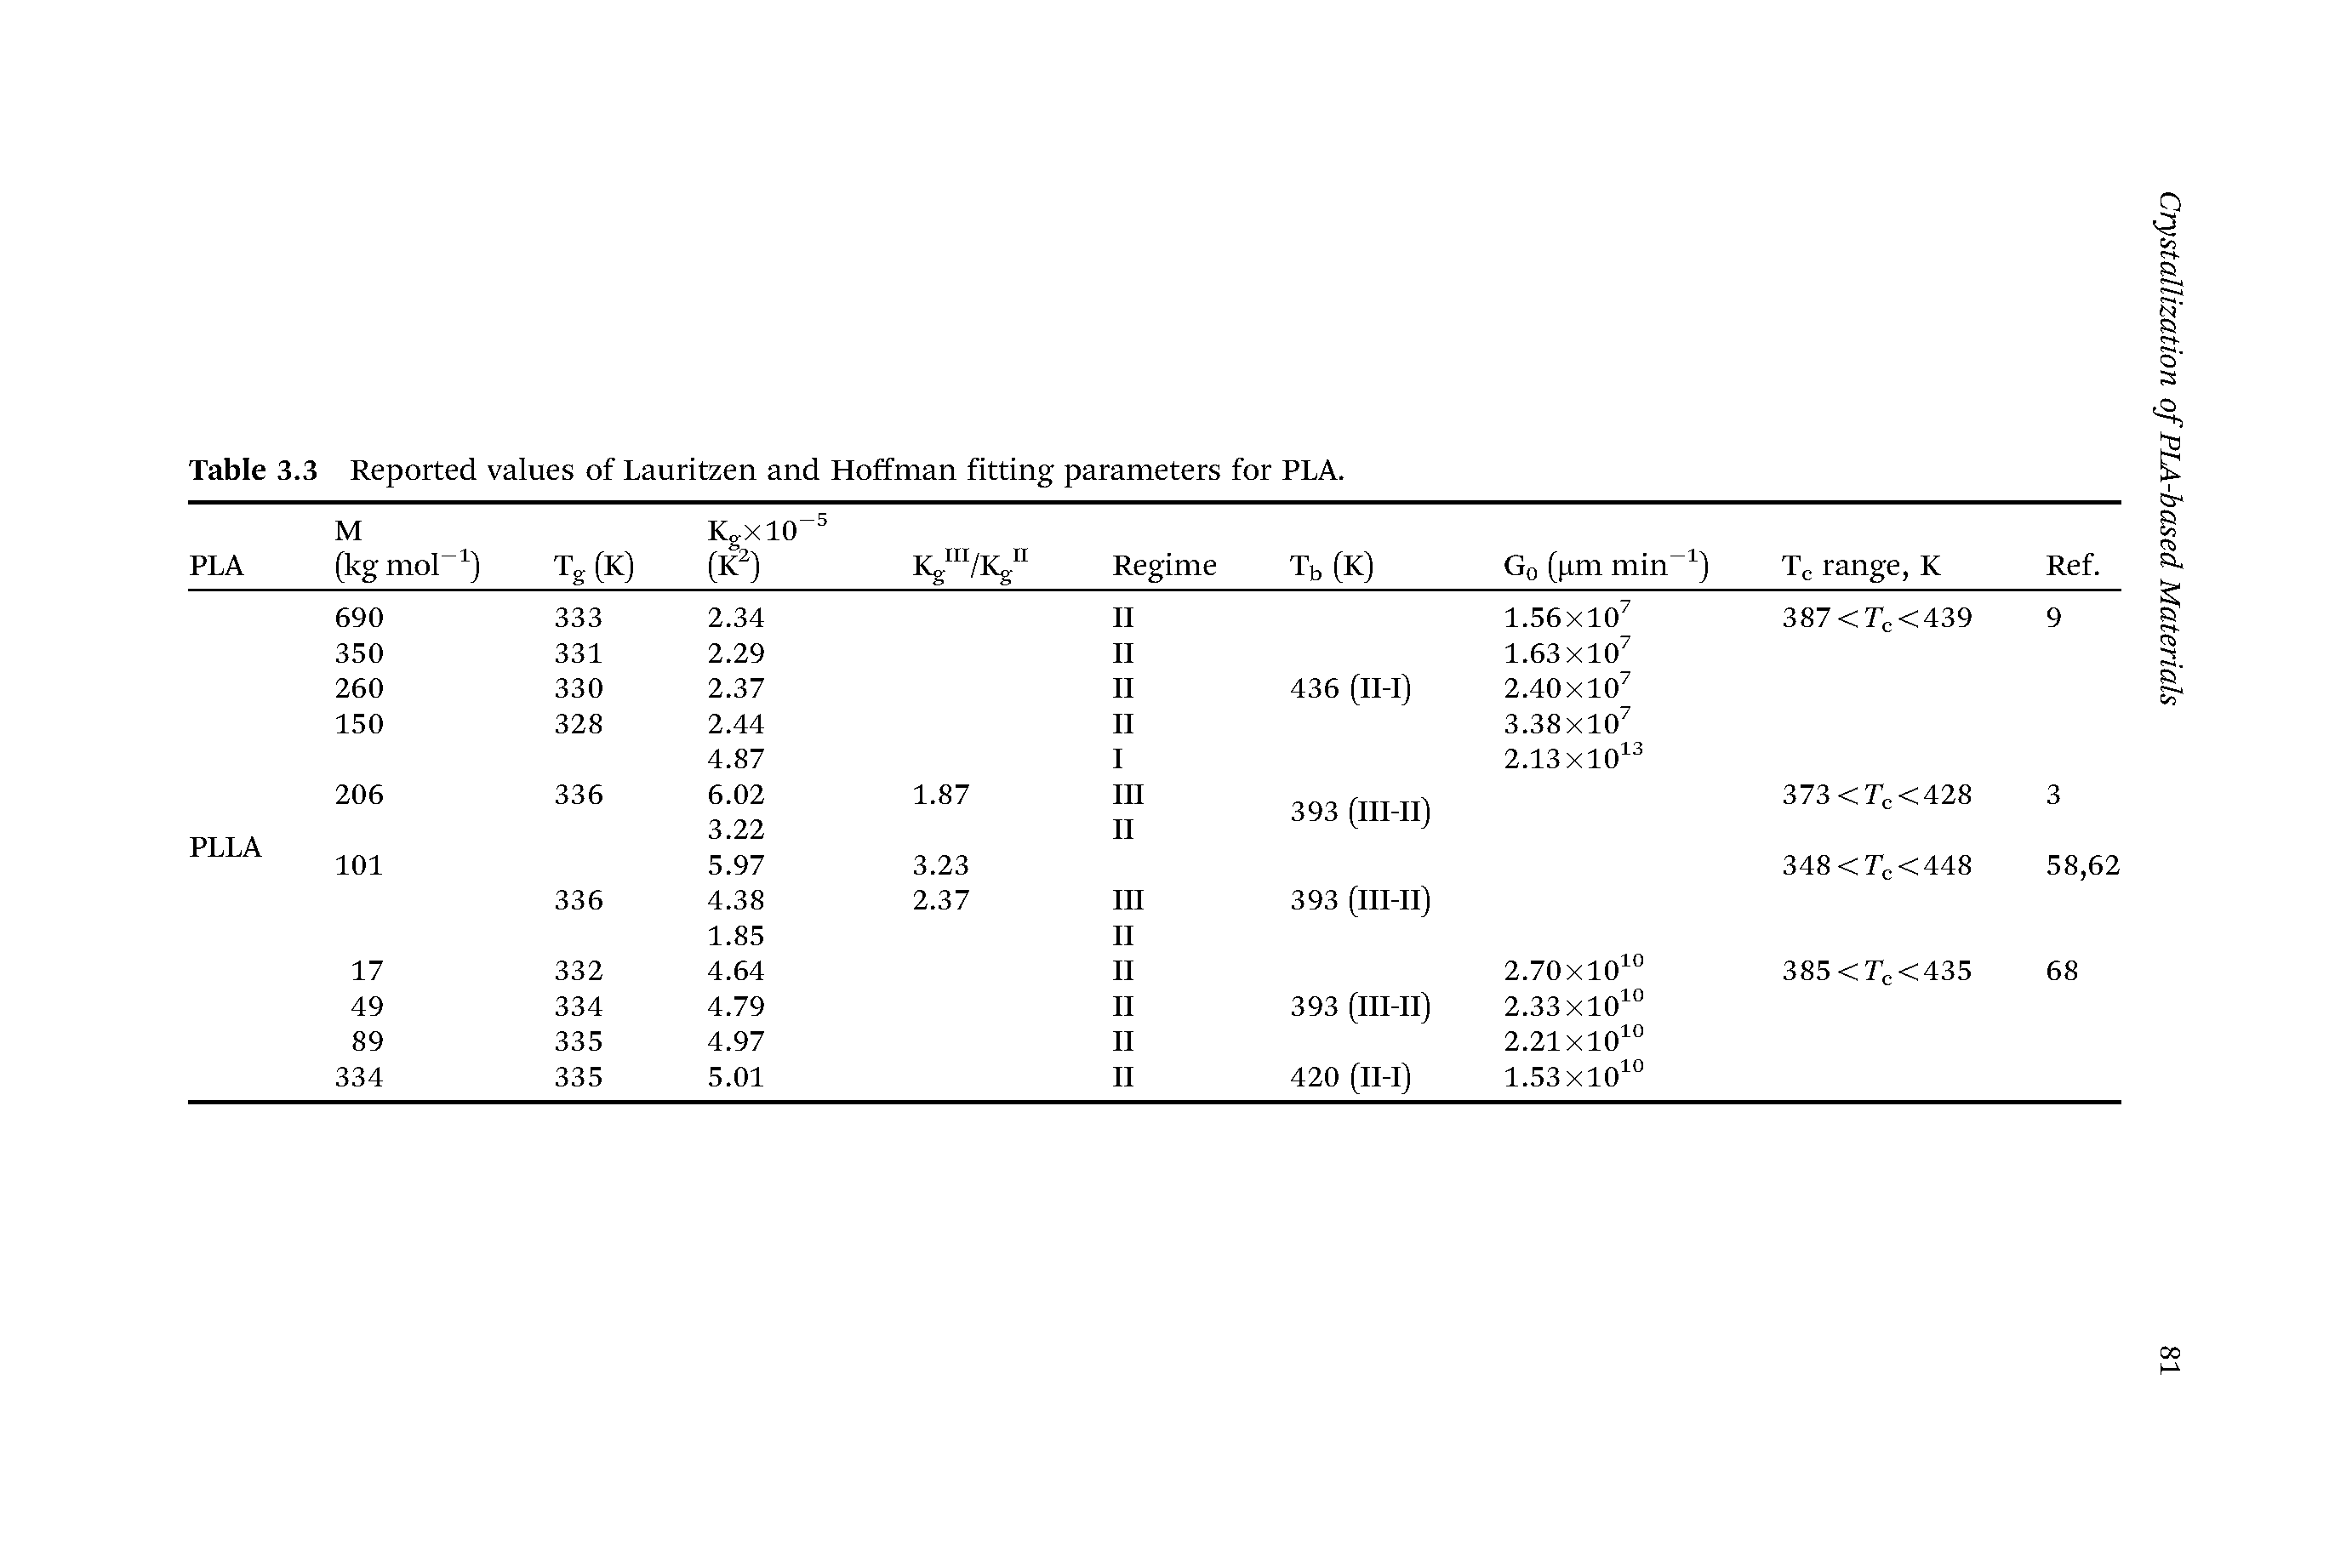 Table 3.3 Reported values of Lauritzen and Hoffman fitting parameters for PLA.